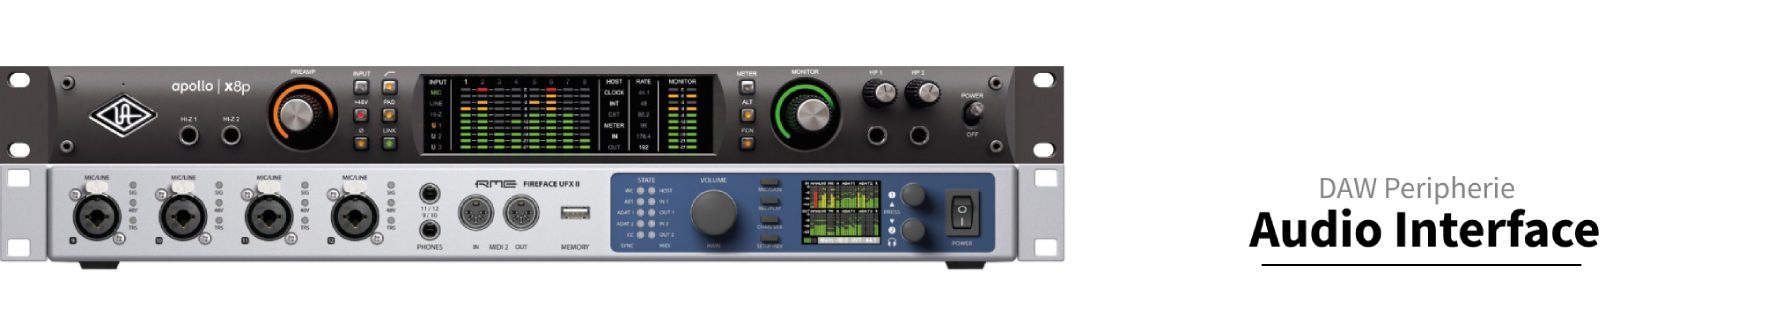 Audio Interface-8 Outputs-ADAT In-ADAT Out